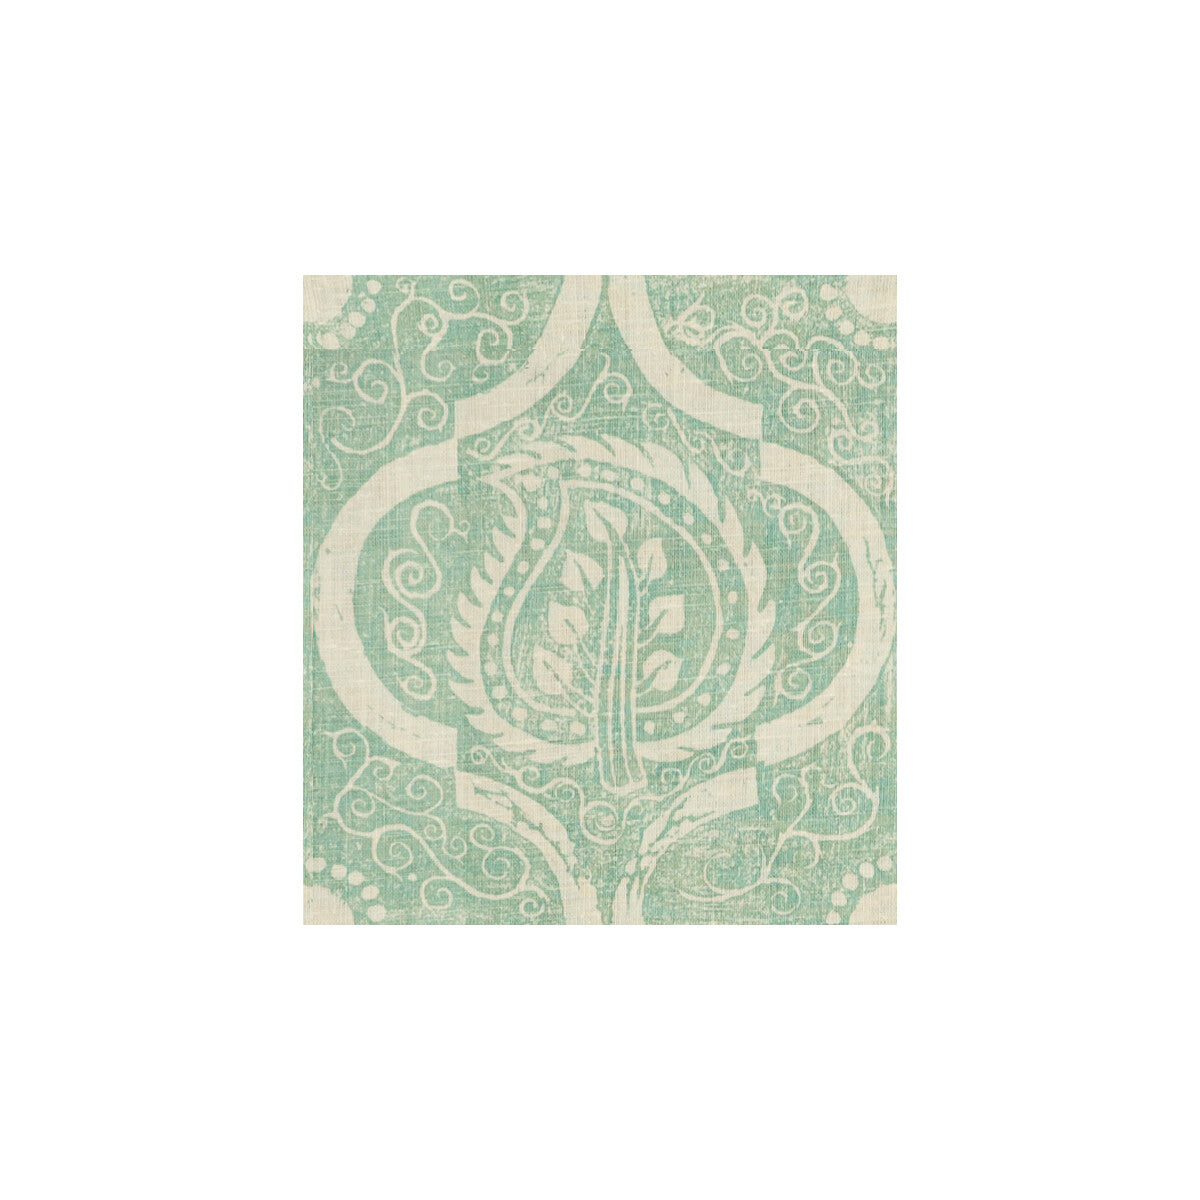 Persian Leaf fabric in aqua color - pattern BFC-3516.13.0 - by Lee Jofa in the Blithfield collection